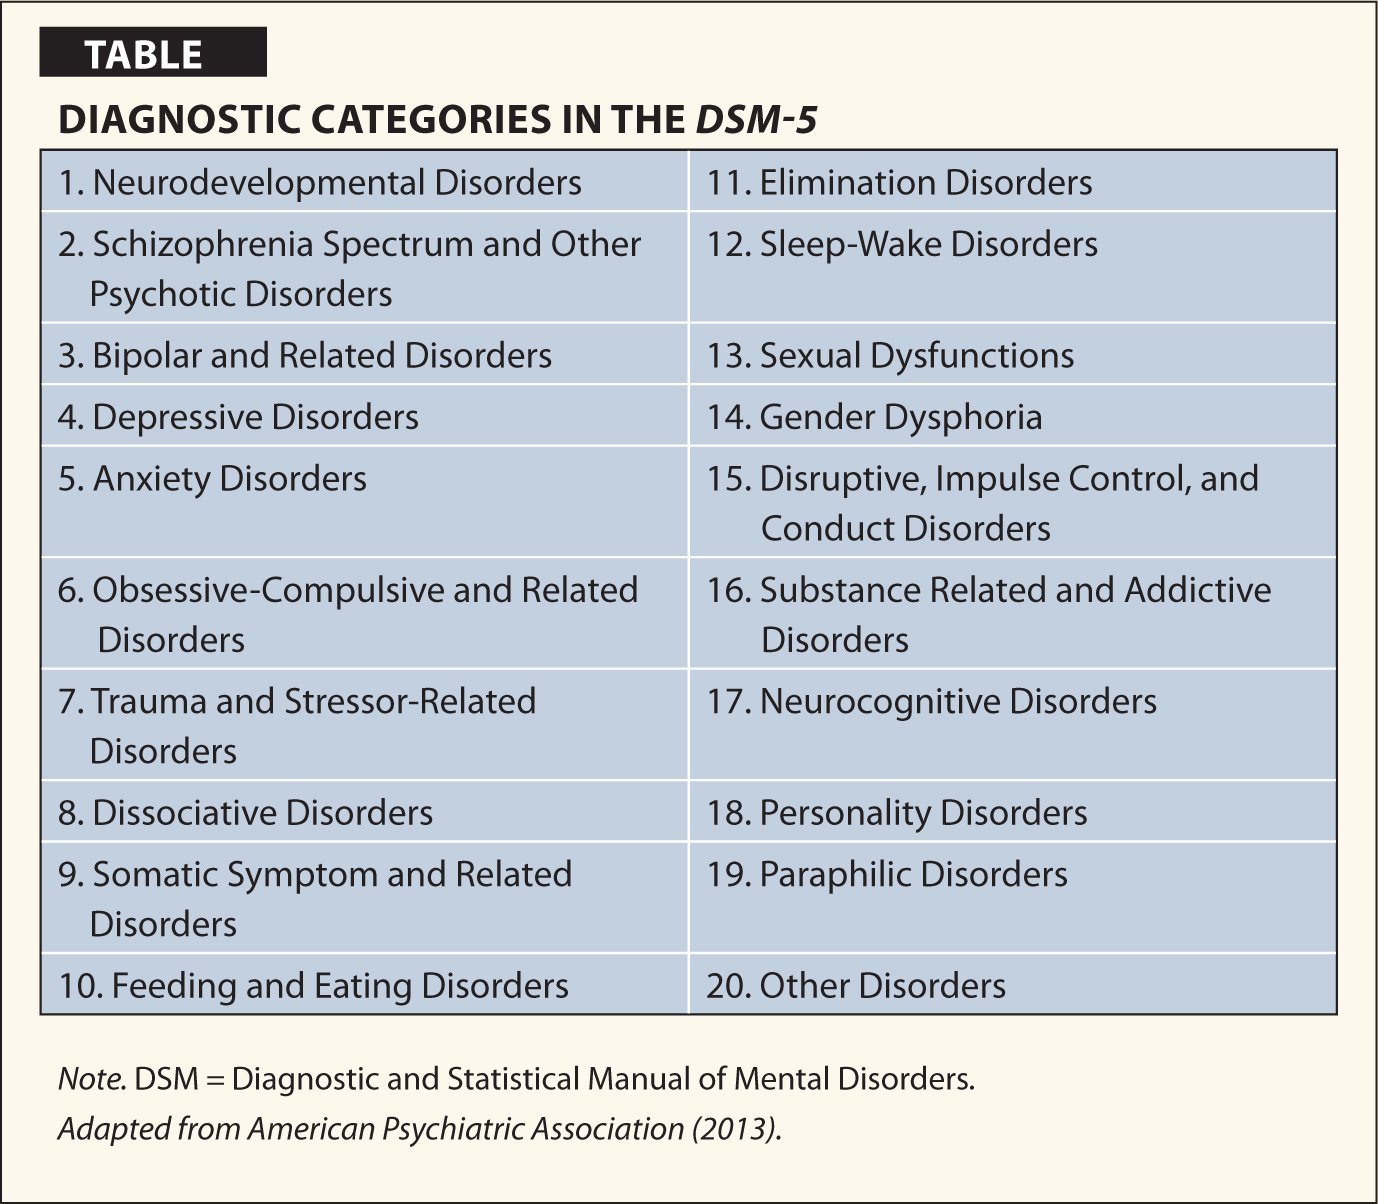 An Overview of the DSM